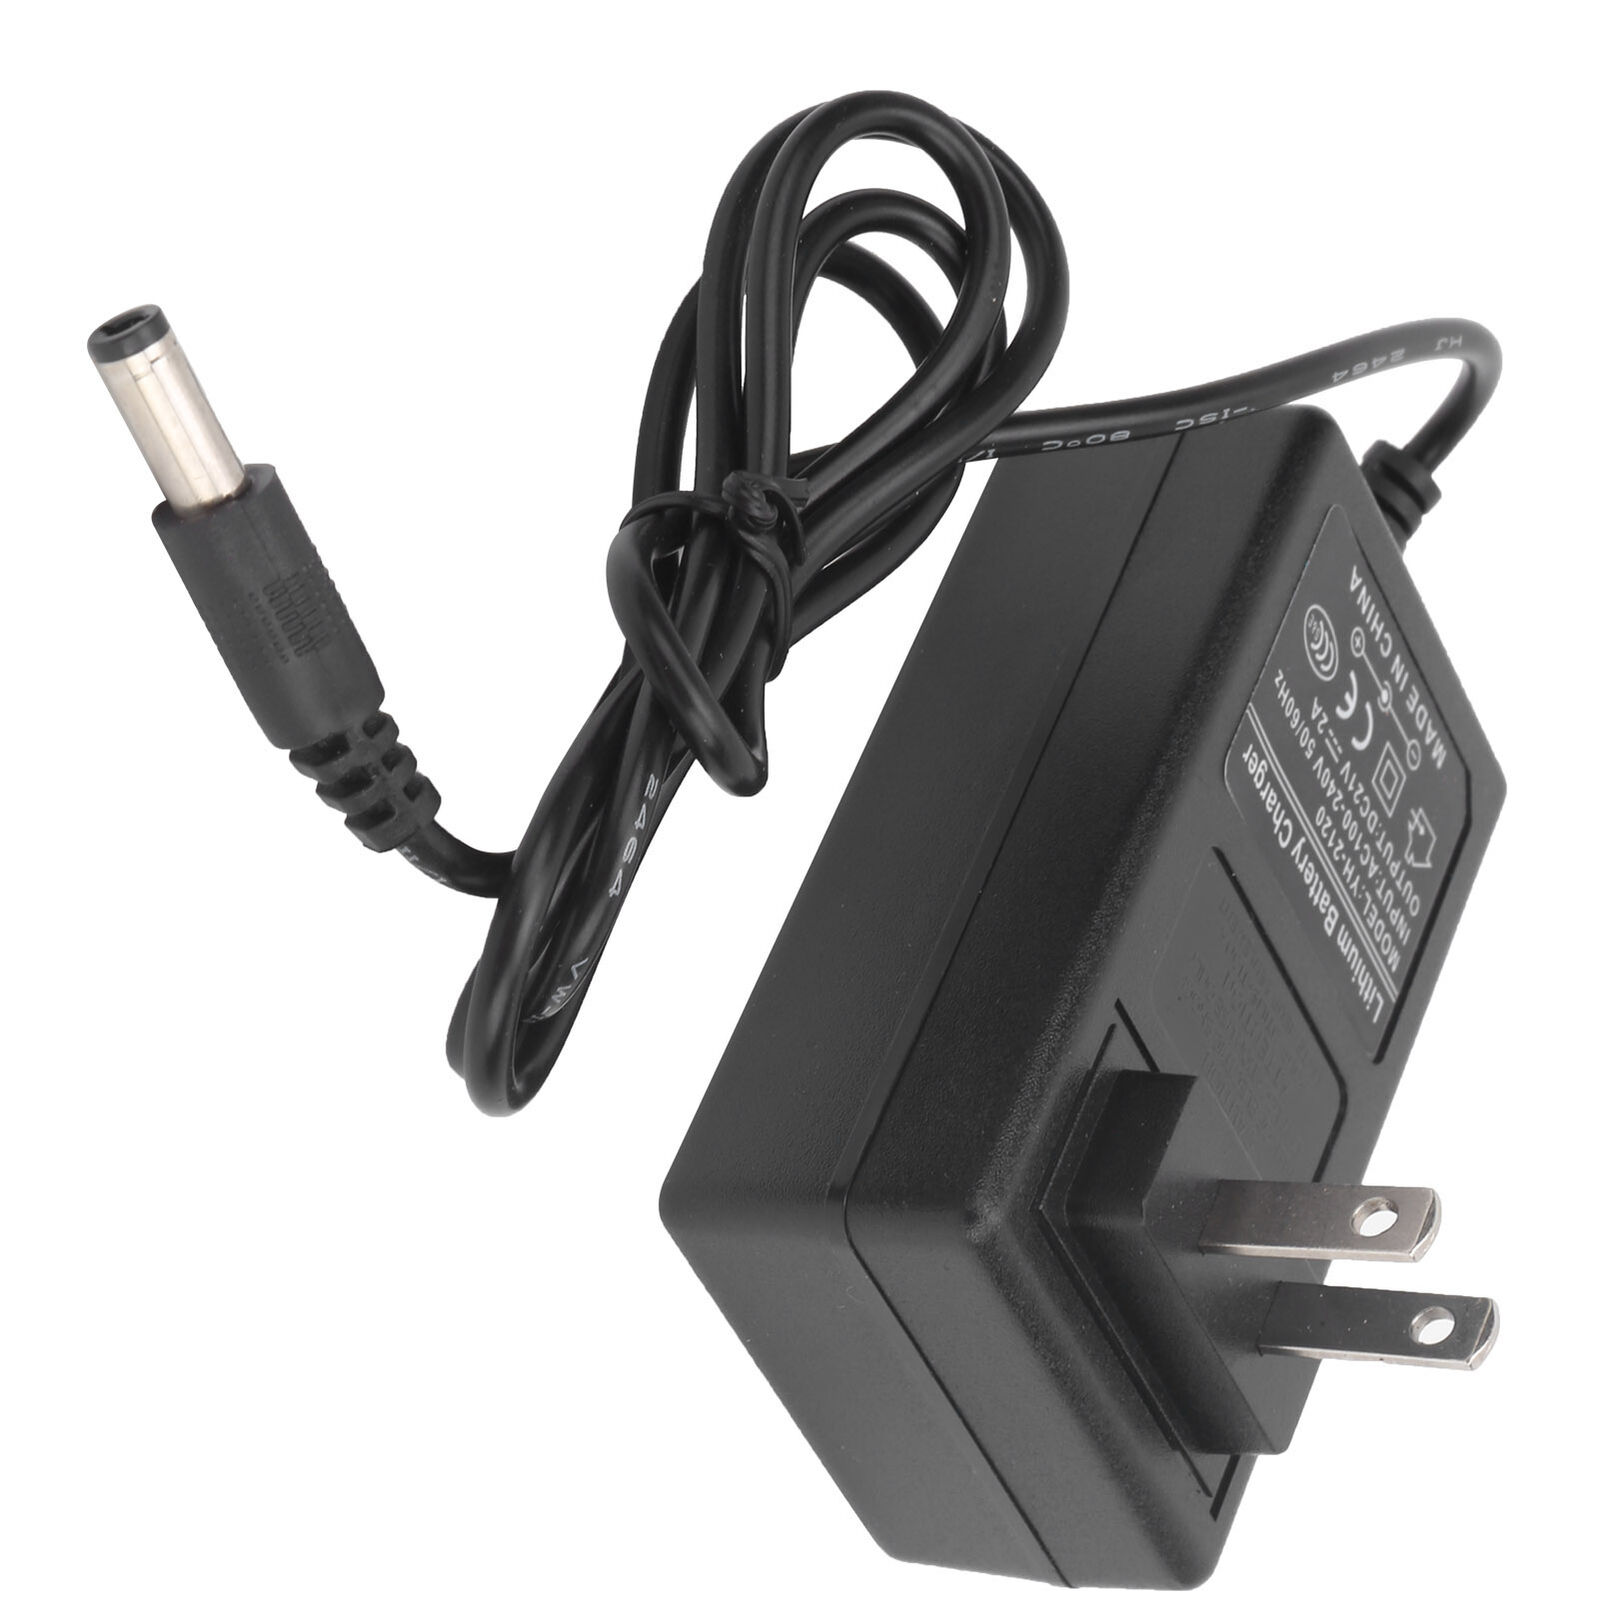 *Brand NEW*Remington HK28U-3.6-100 For PG-200 PG-250 PG-350 AC Adapter Power Supply Charger - Click Image to Close